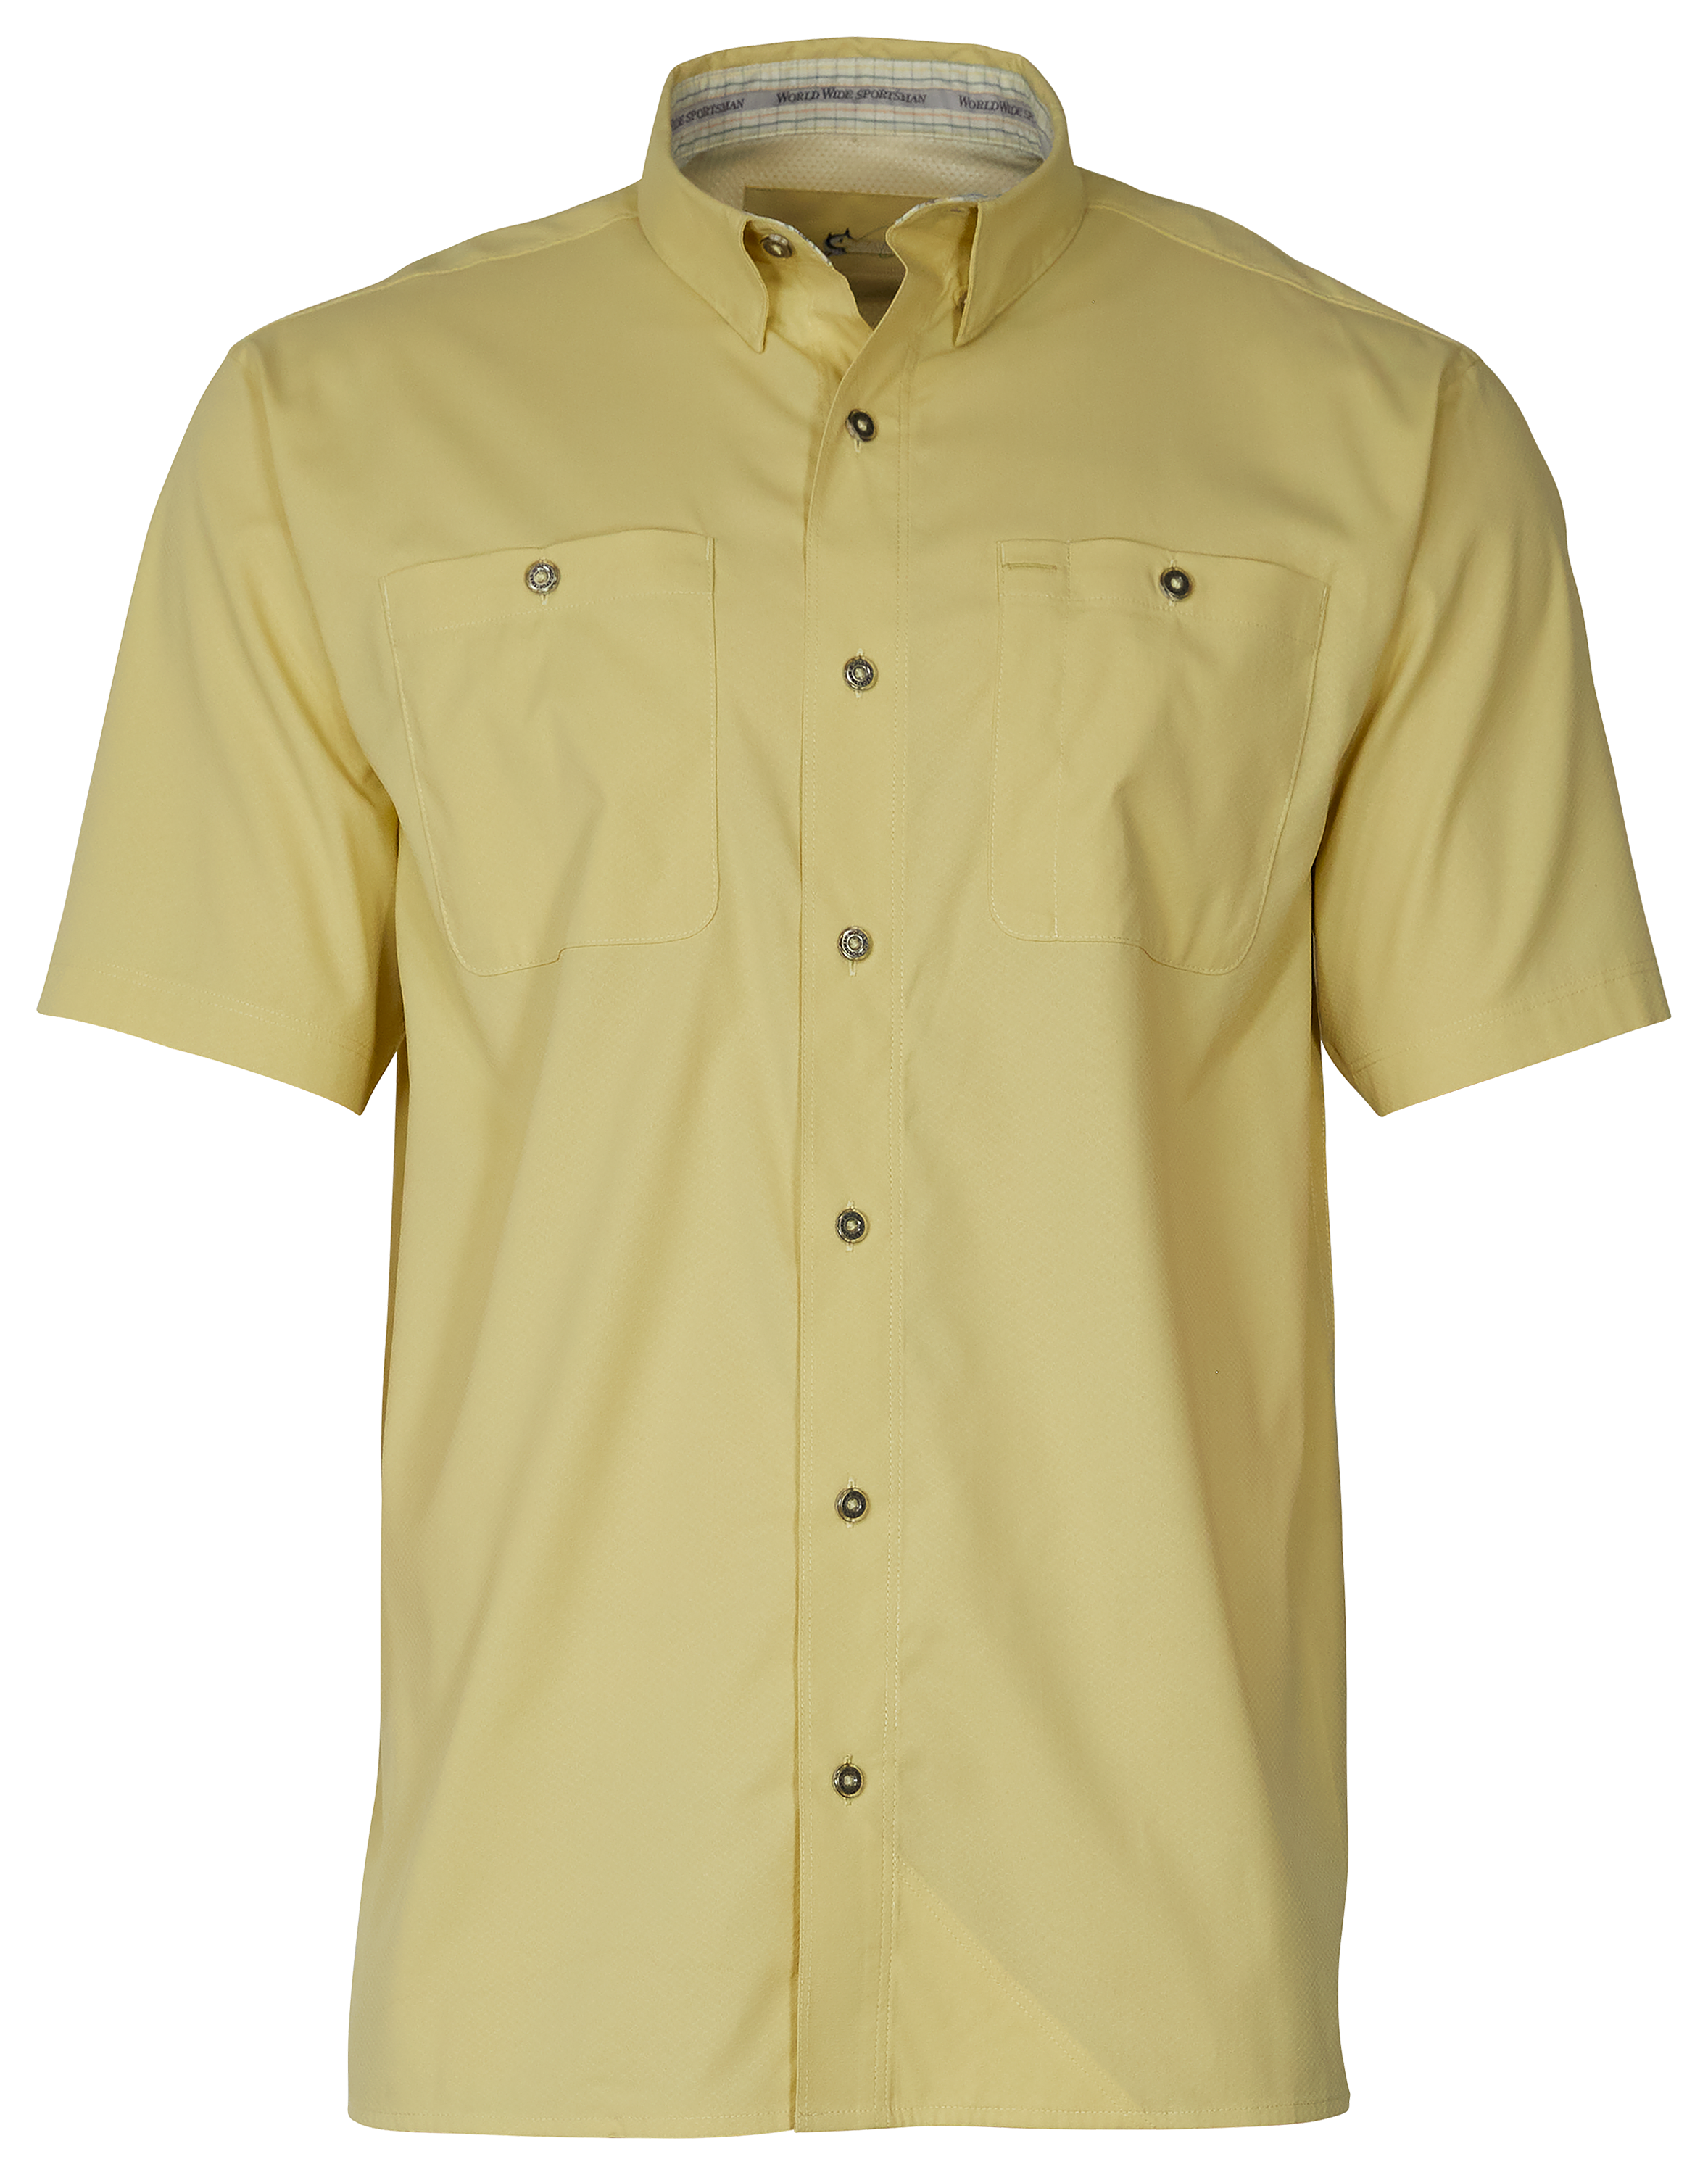 Men's Rugged Earth Outfitters Vented Yellow Short  Yellow shorts, Mens fishing  shirts, Fishing shirts